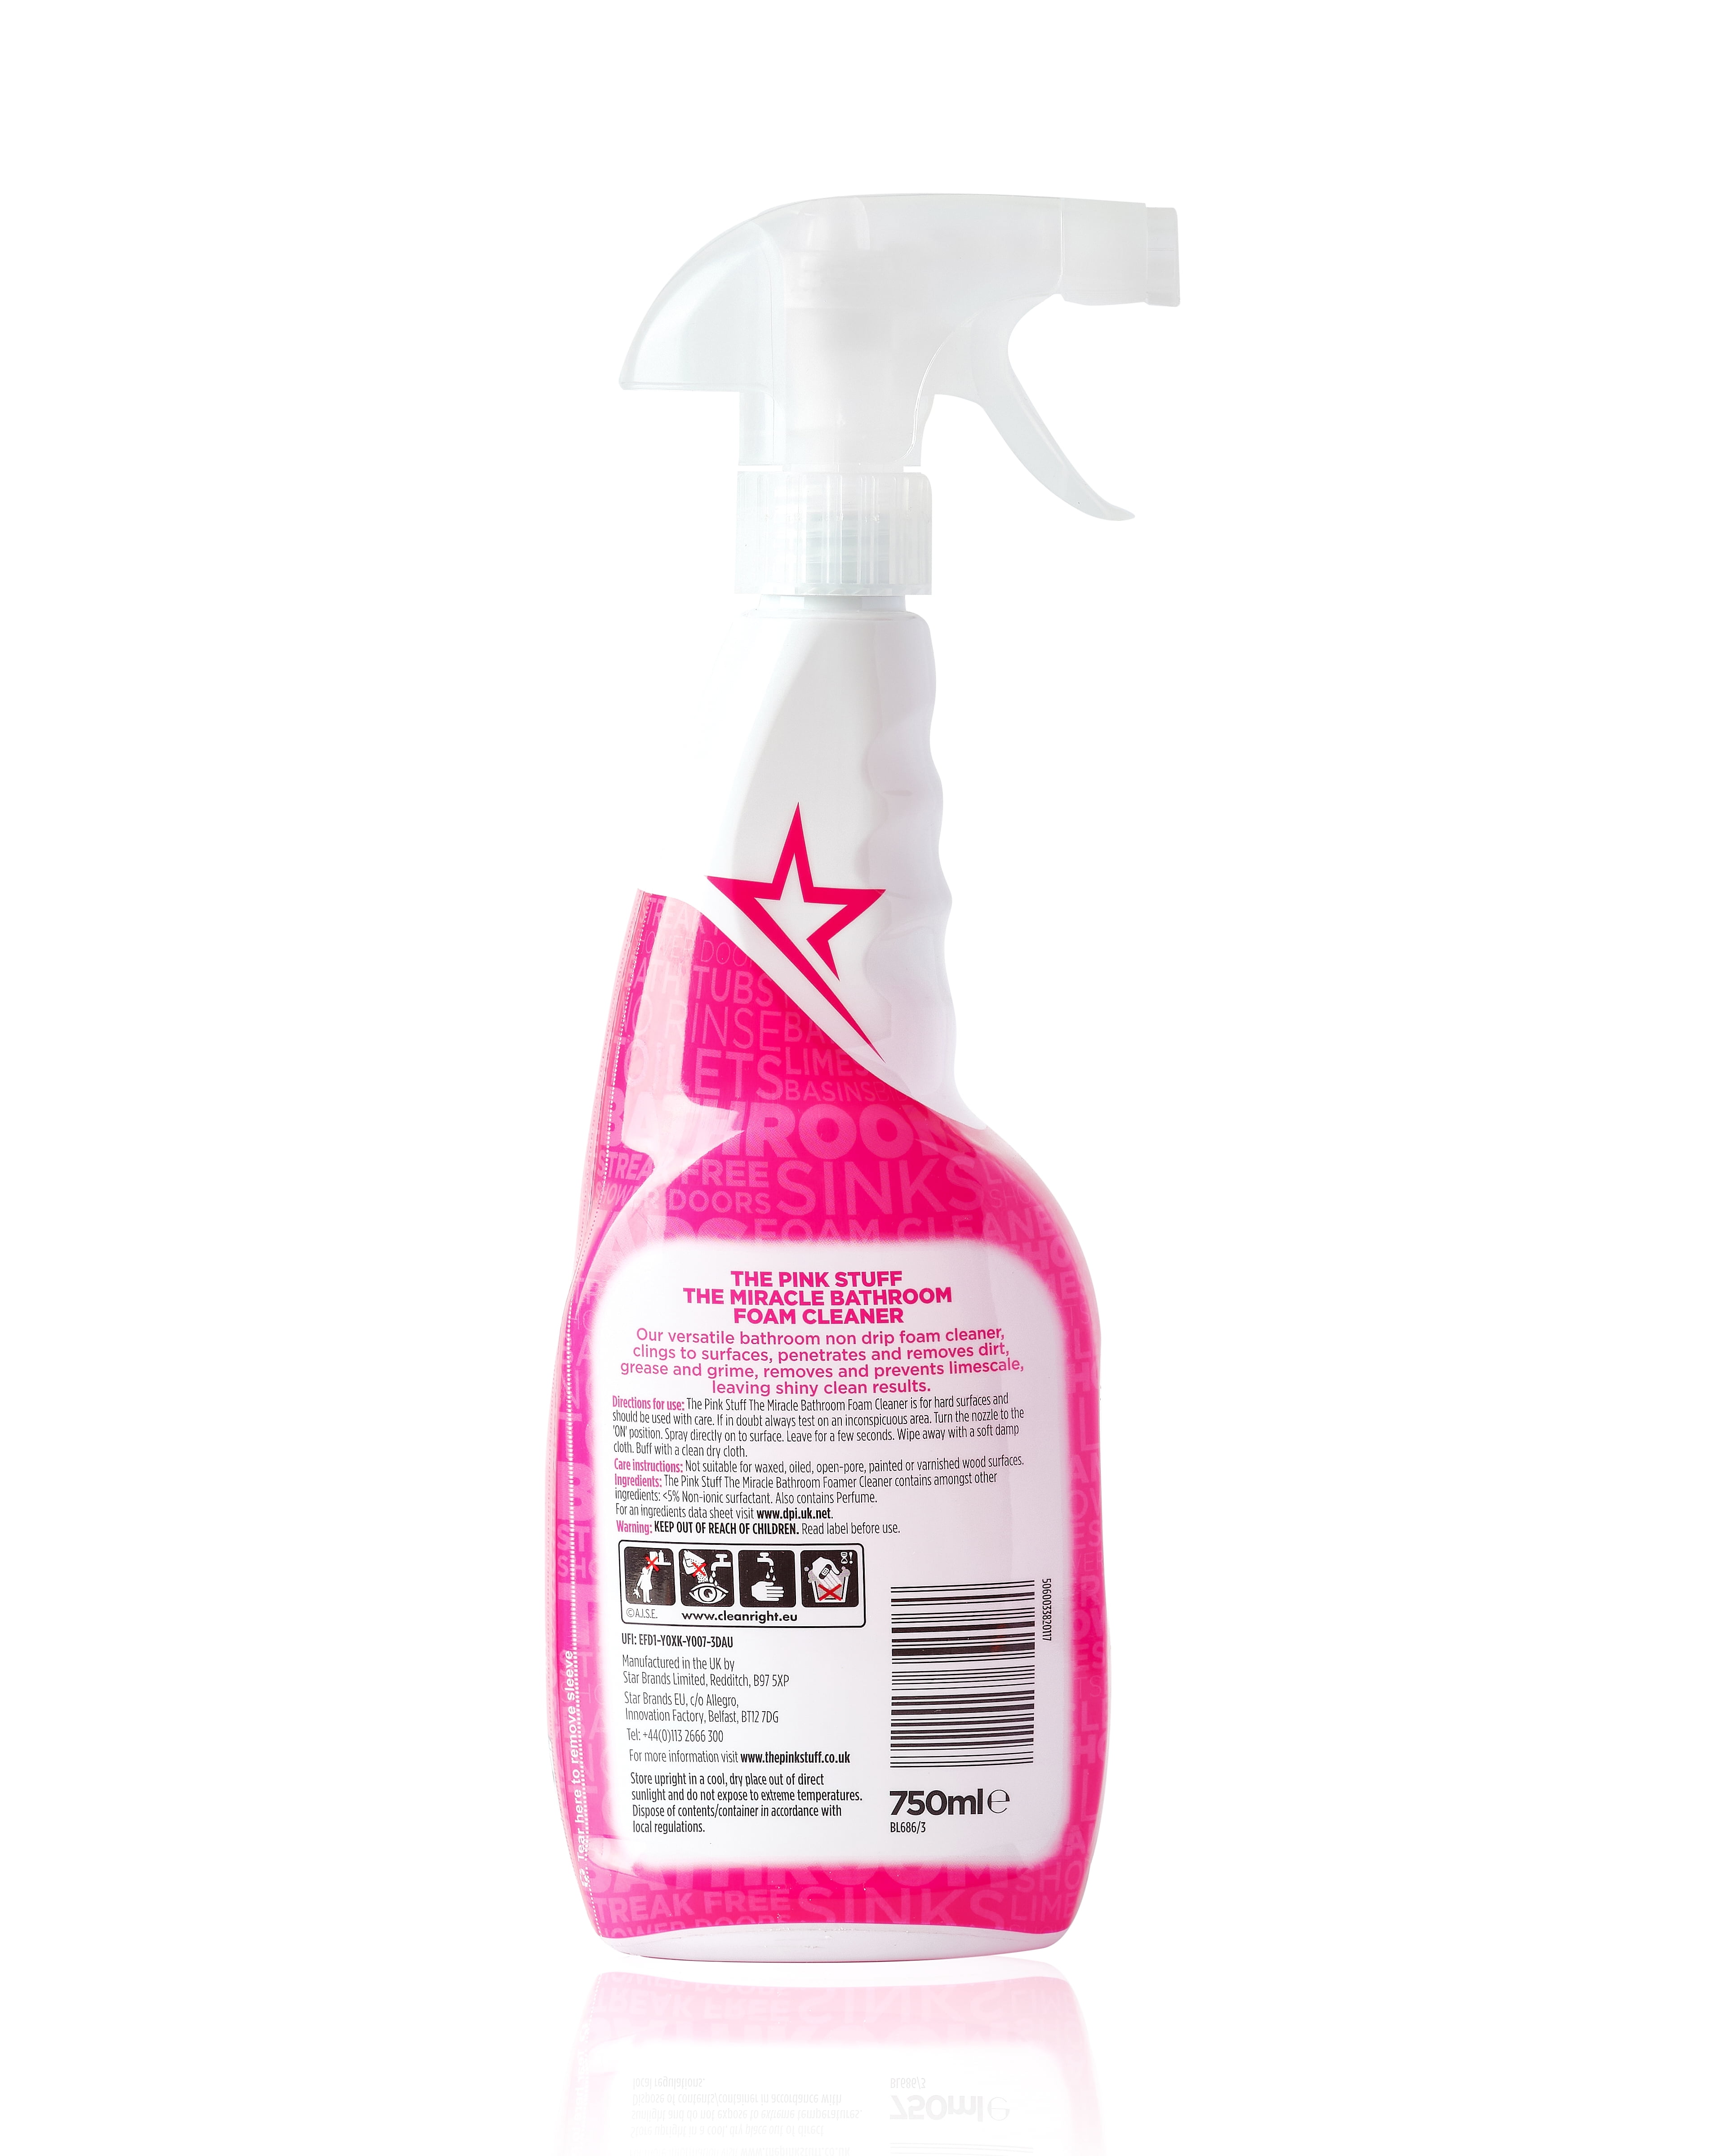 The Pink Stuff Miracle Bathroom Foam Cleaner for $4.99 (Reg. $10) - Kids  Activities, Saving Money, Home Management